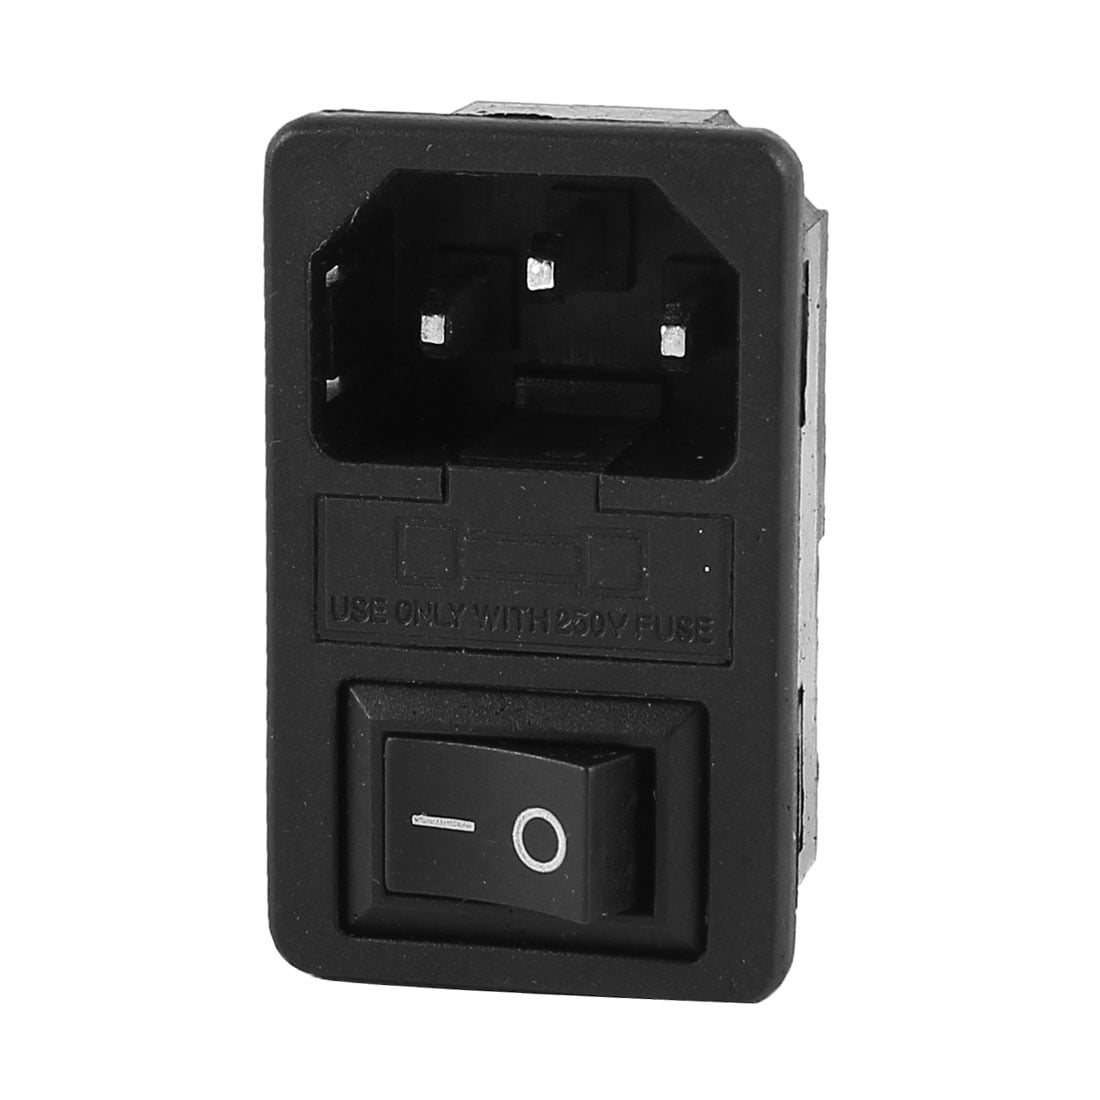 15A/250V 3pin AC power socket with maile Power Rocker Switch Fused IEC320 